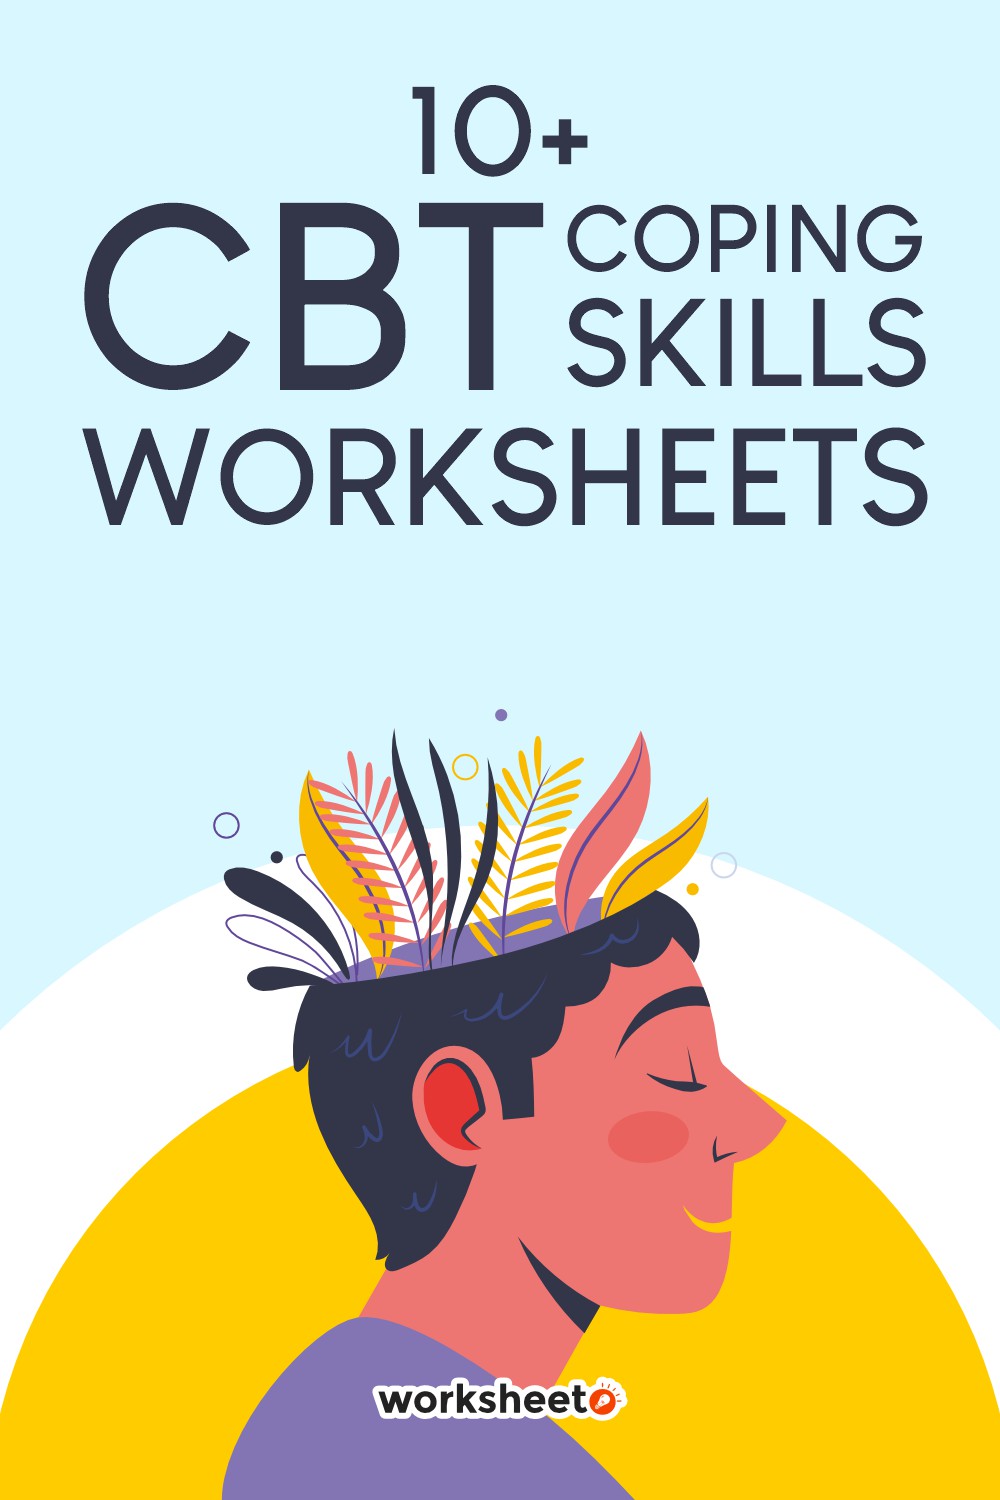 17 Images of CBT Coping Skills Worksheets